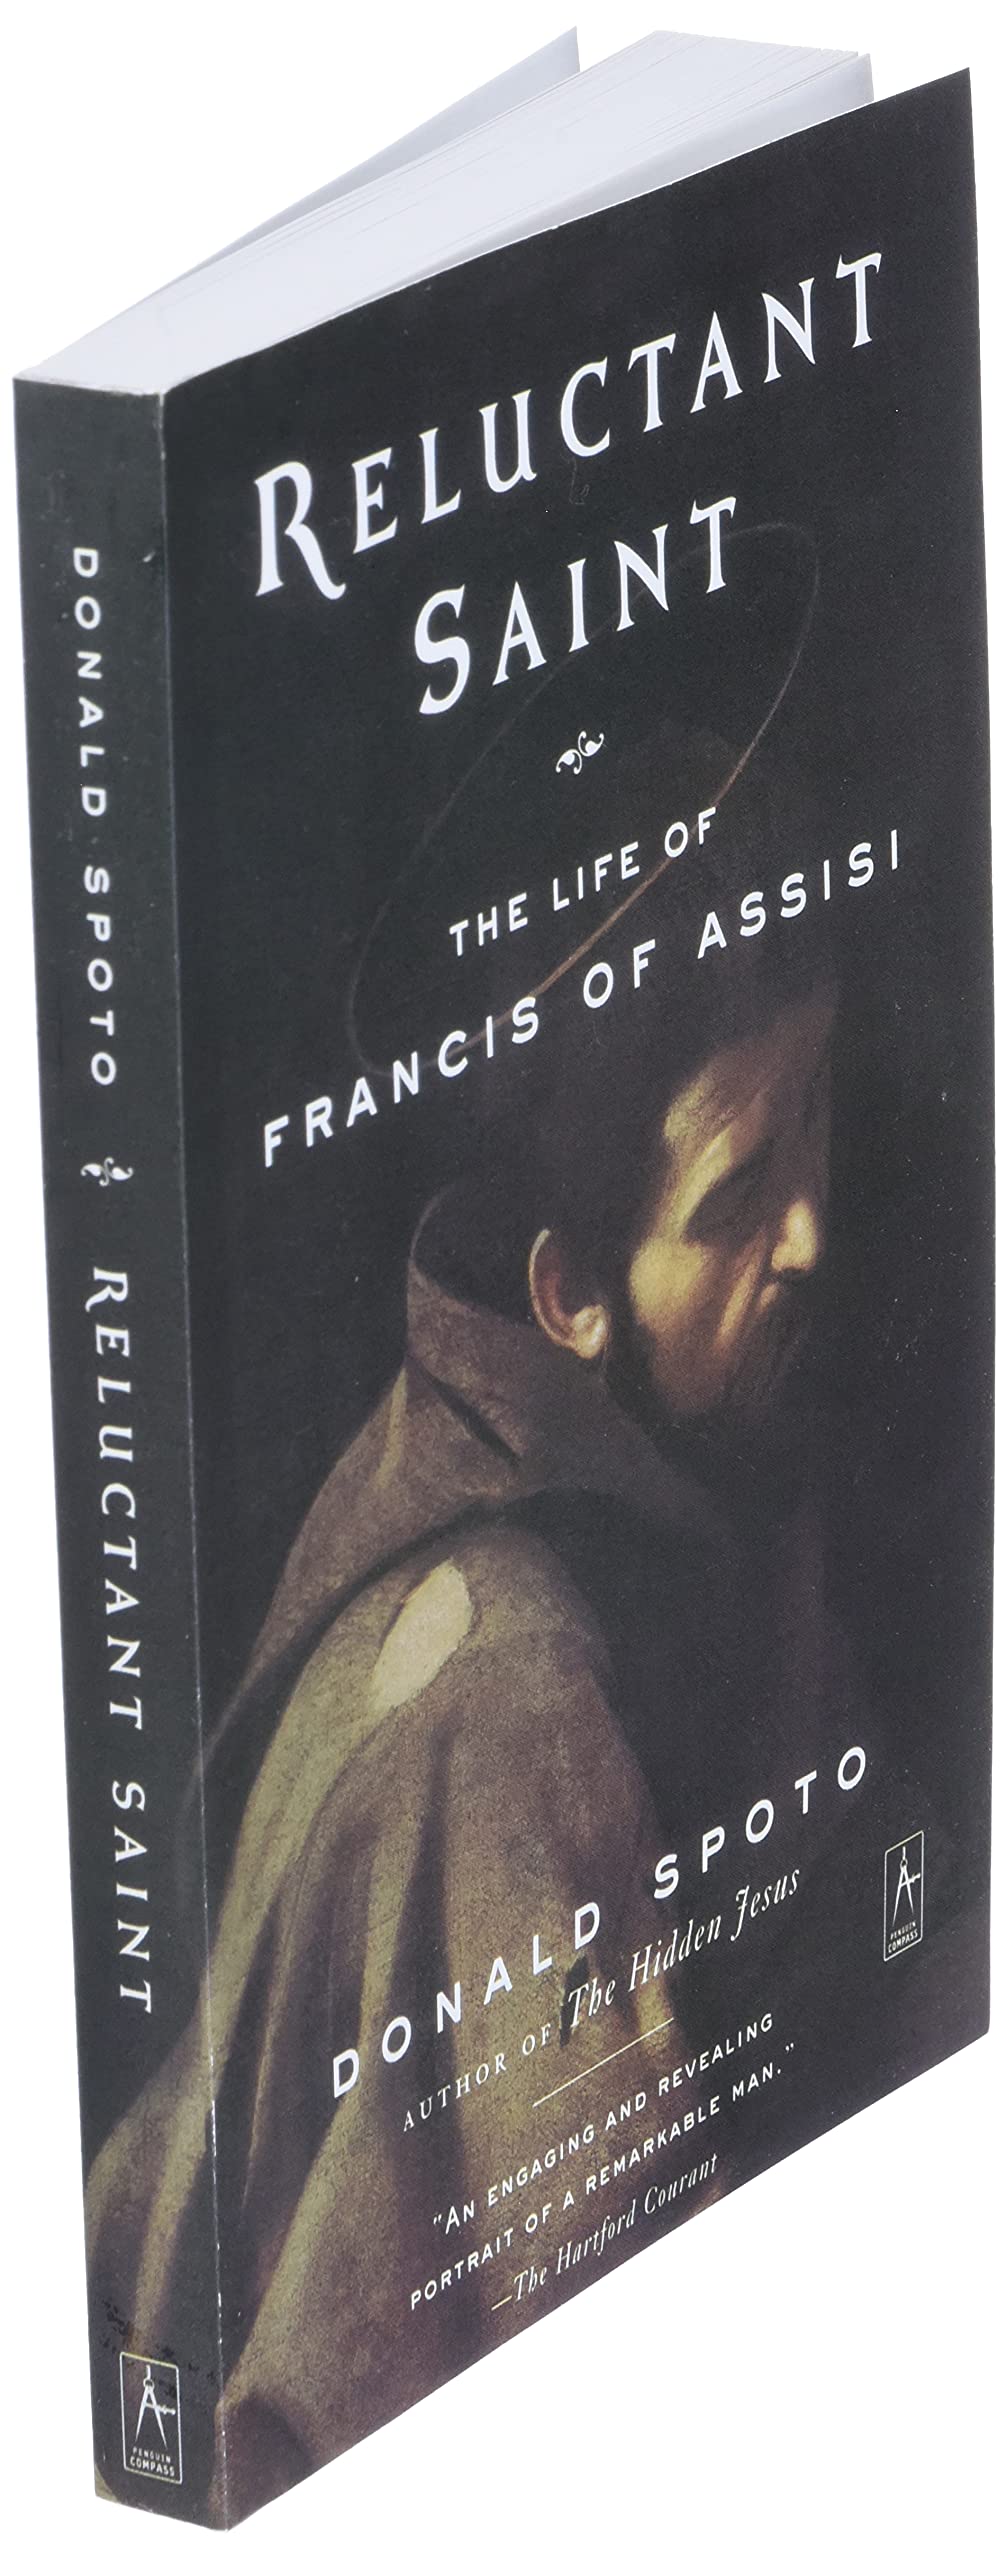 Reluctant Saint: The Life of Francis of Assisi (Compass)